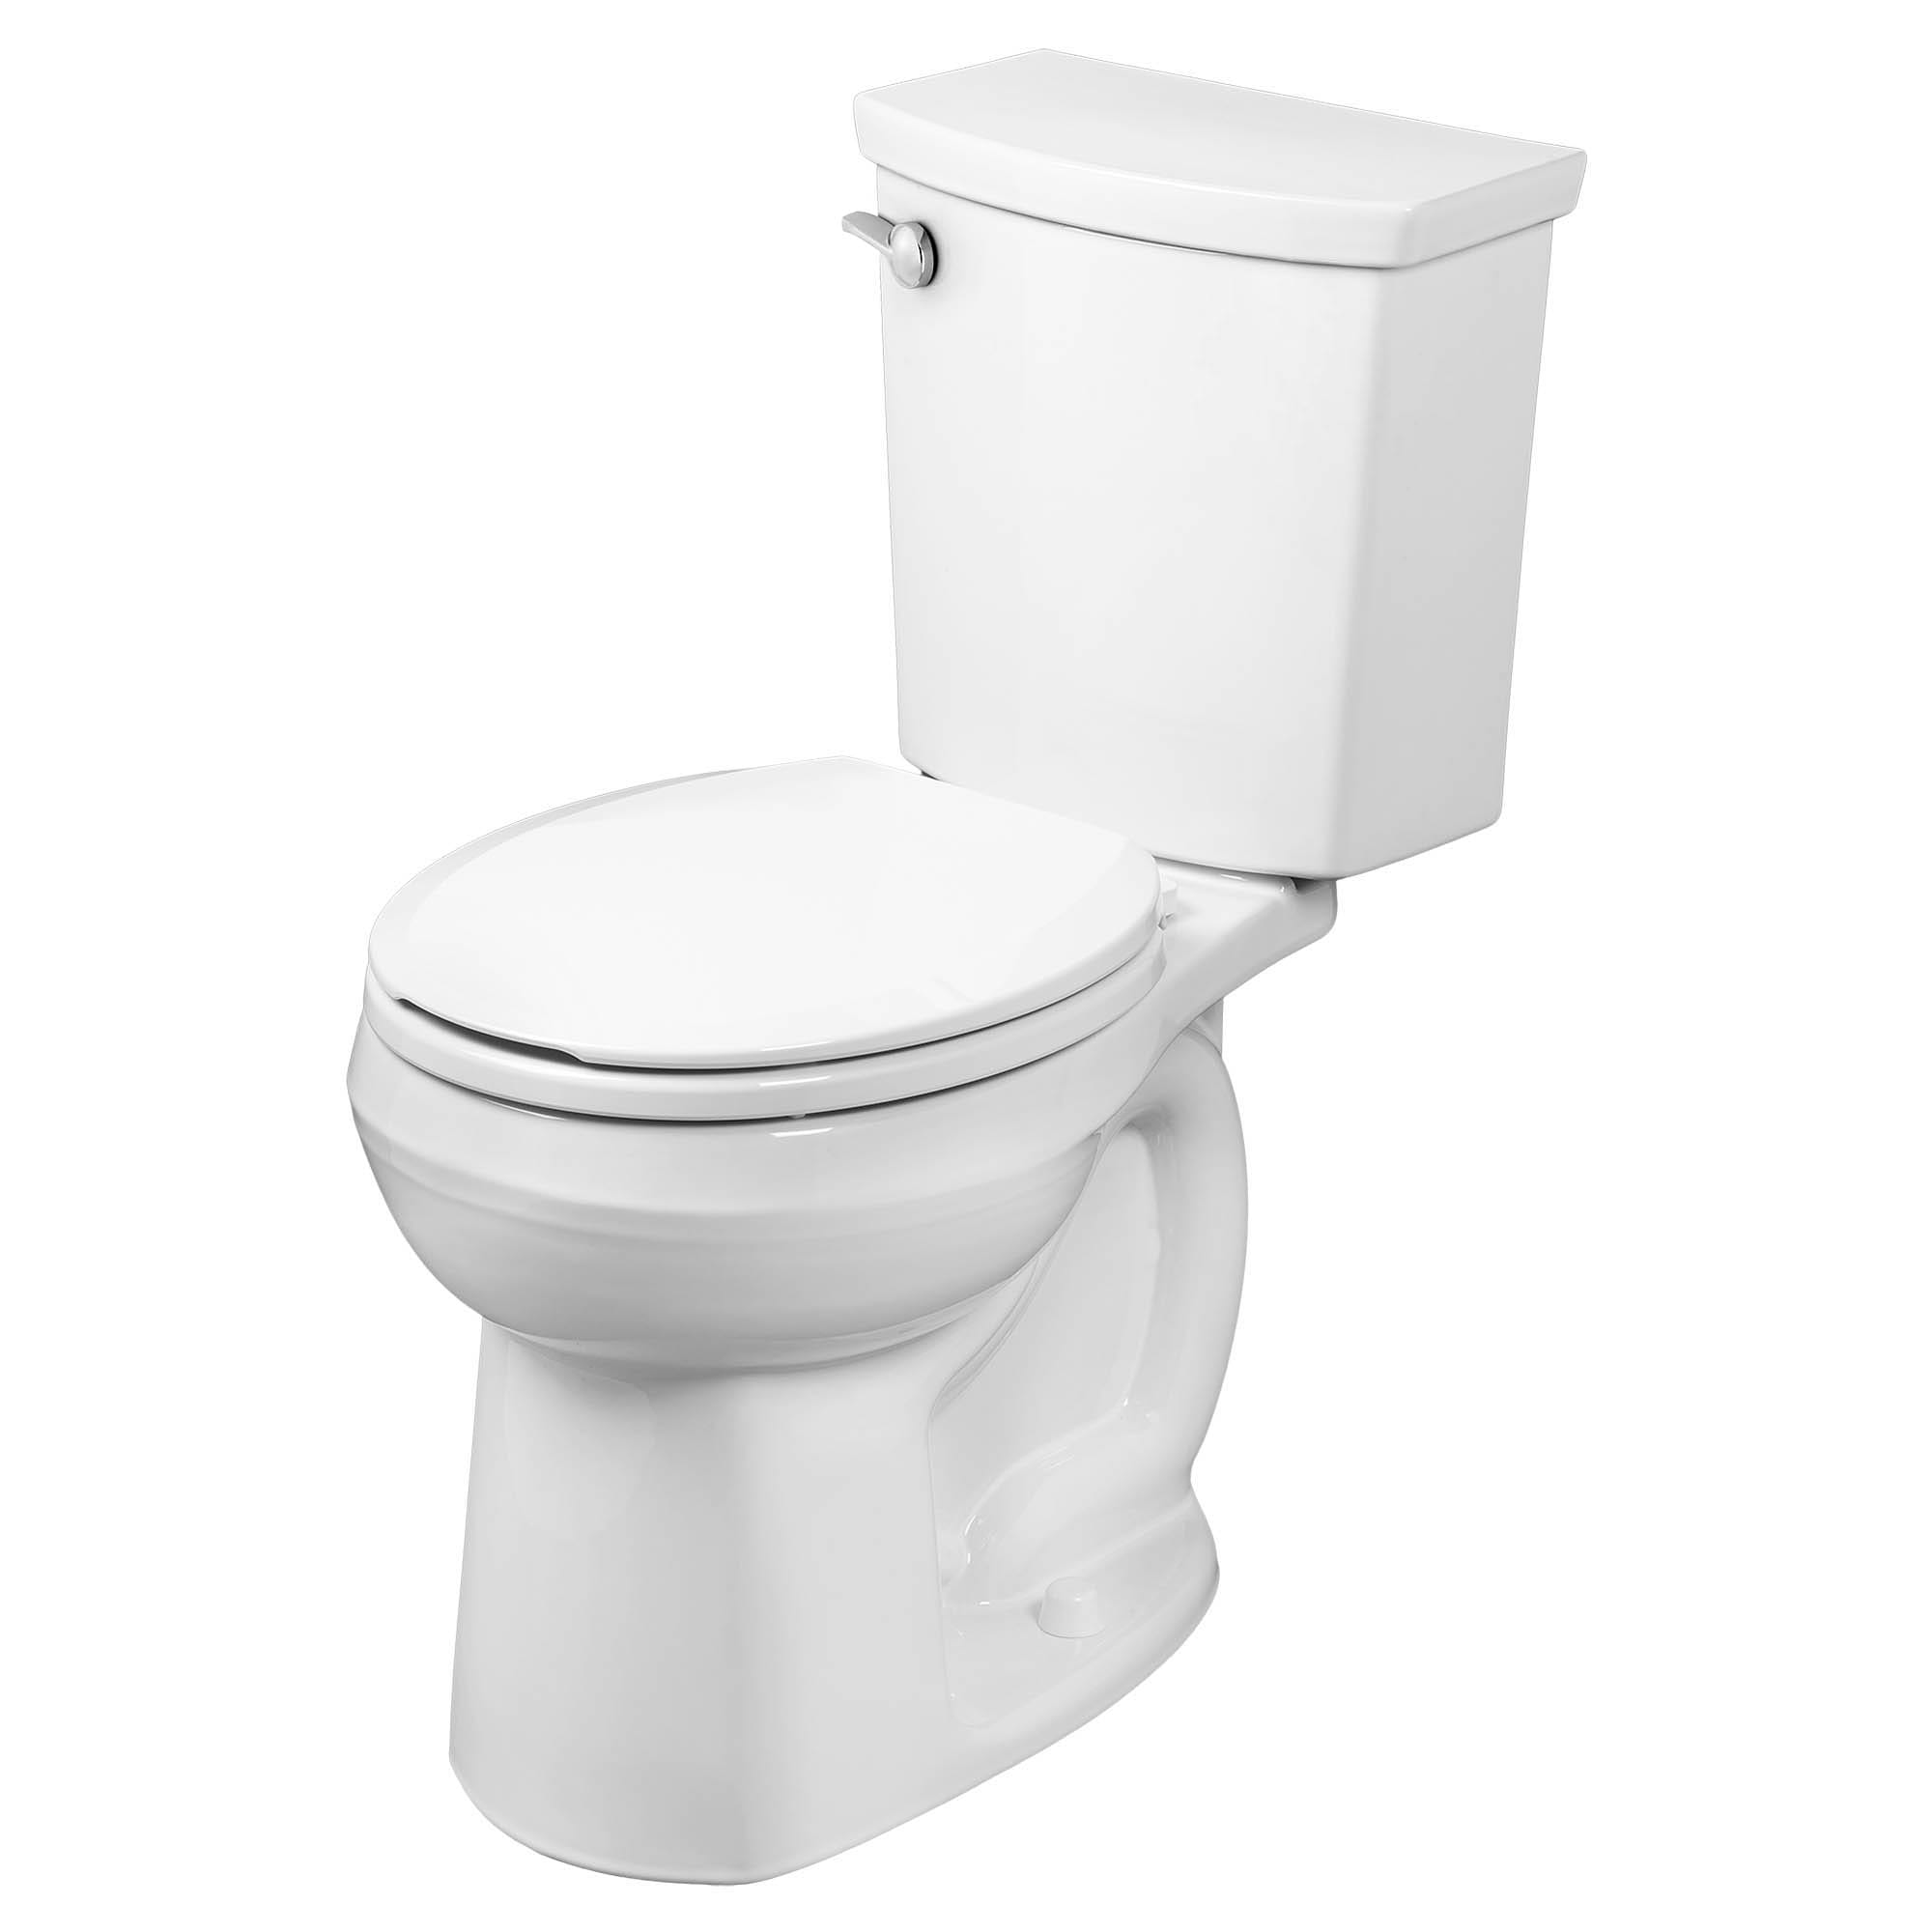 H2Optimum Two Piece 11 gpf 42 Lpf Standard Height Round Front Toilet Less Seat WHITE